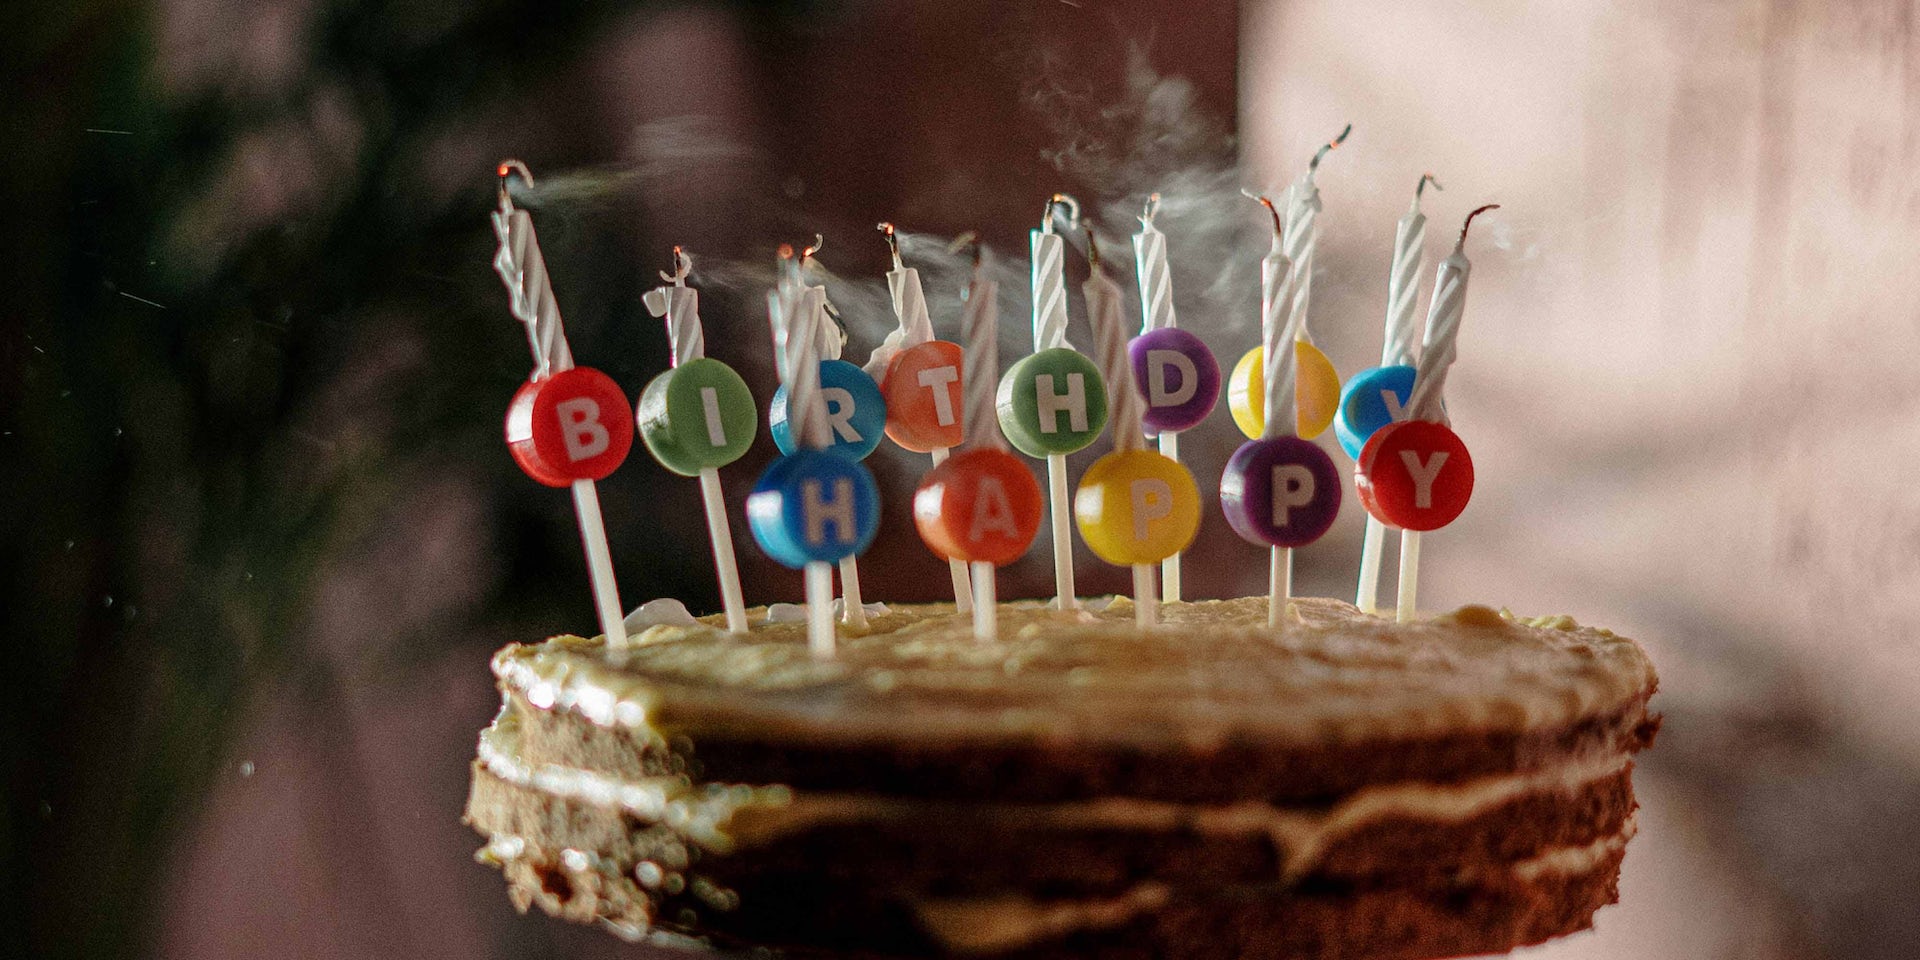 The Surprising Number of People Needed in a Room for Two to Share a Birthday